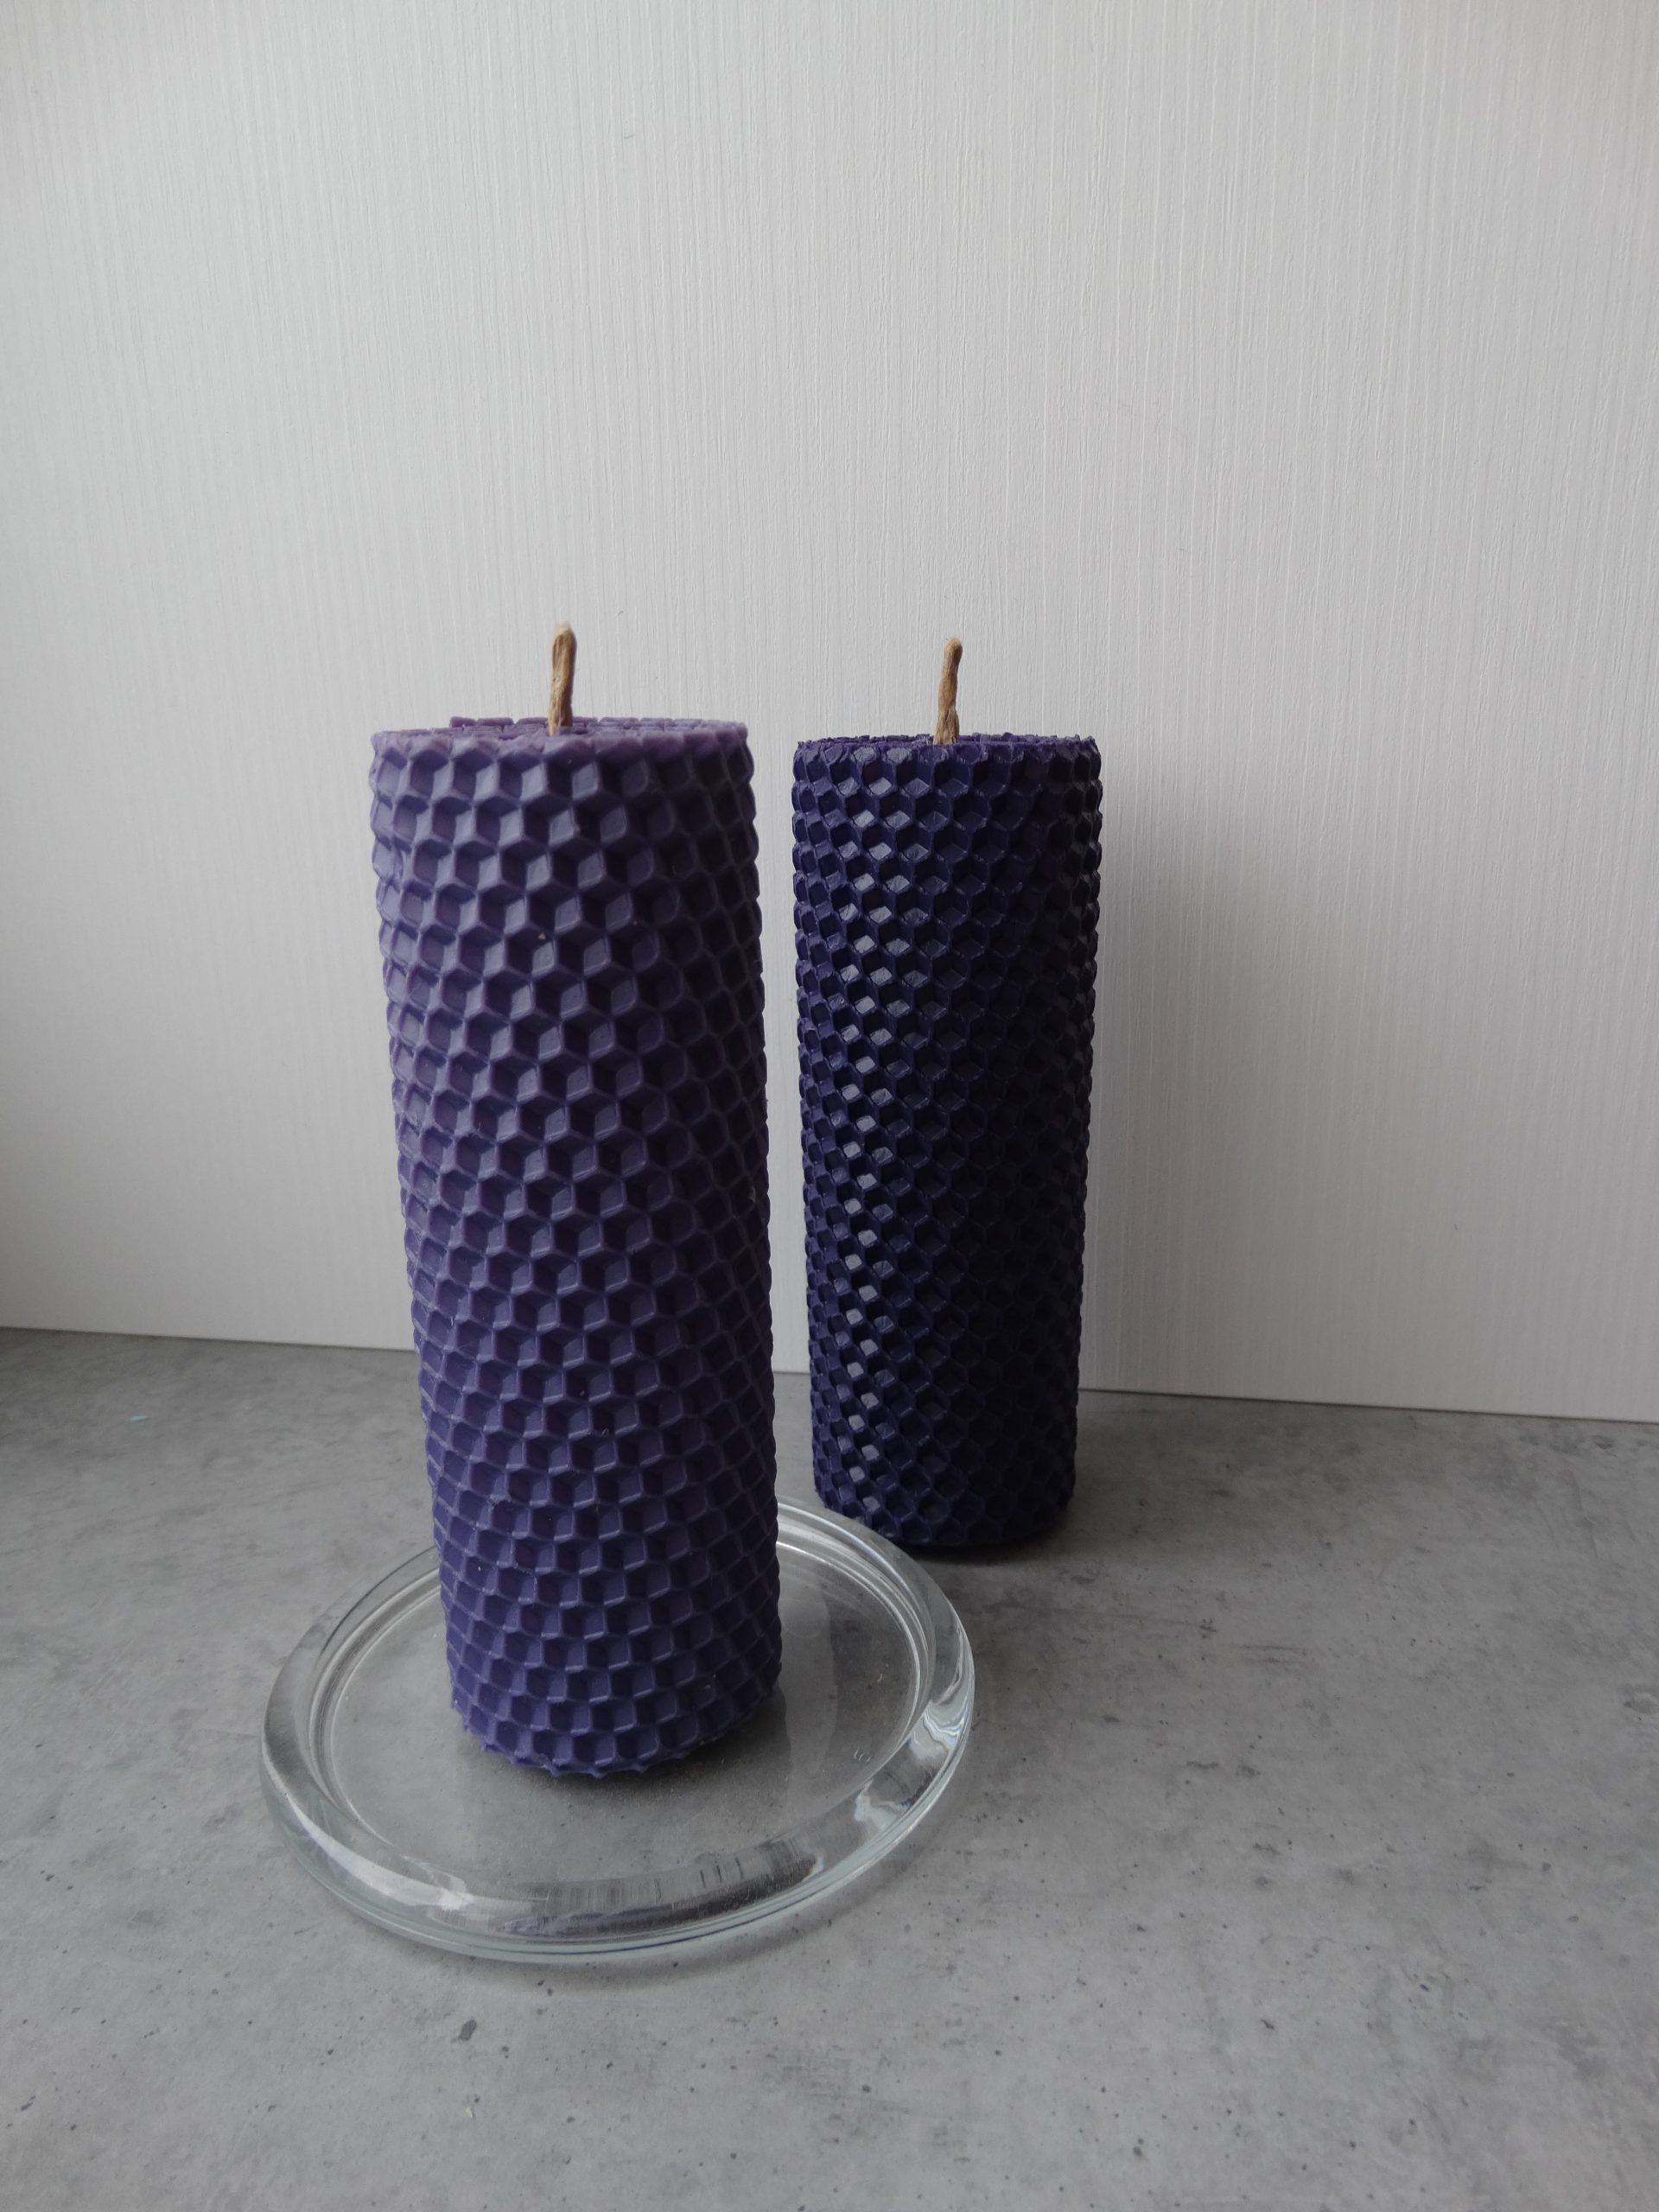 A set of colored candles made of natural wax.